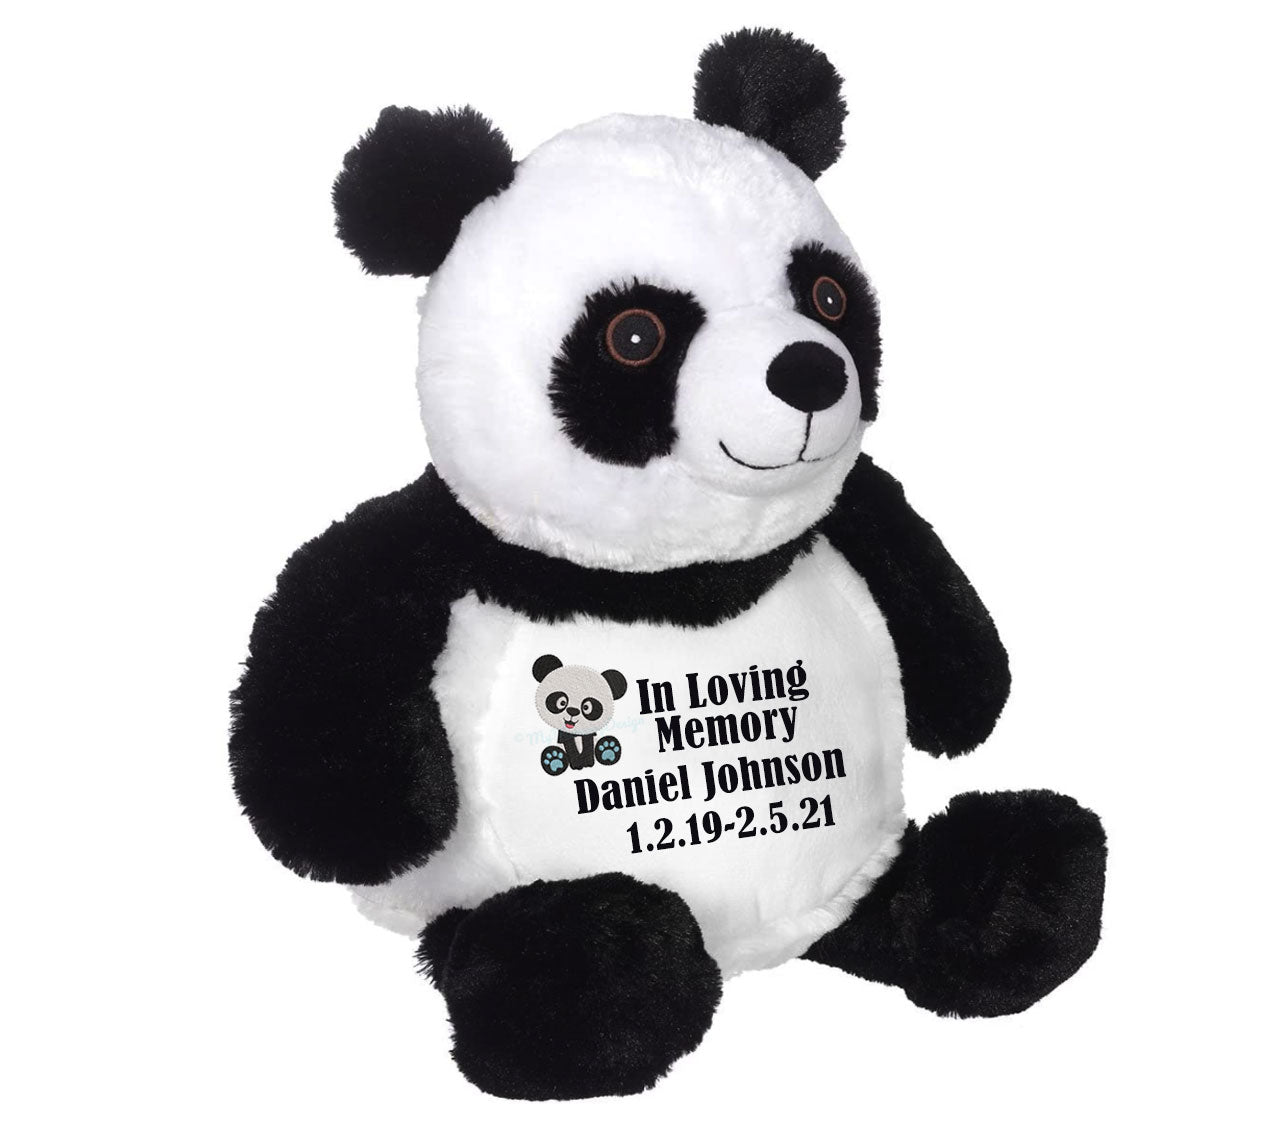 Pet Memorial and Sympathy Gifts - Family Panda - Unique gifting